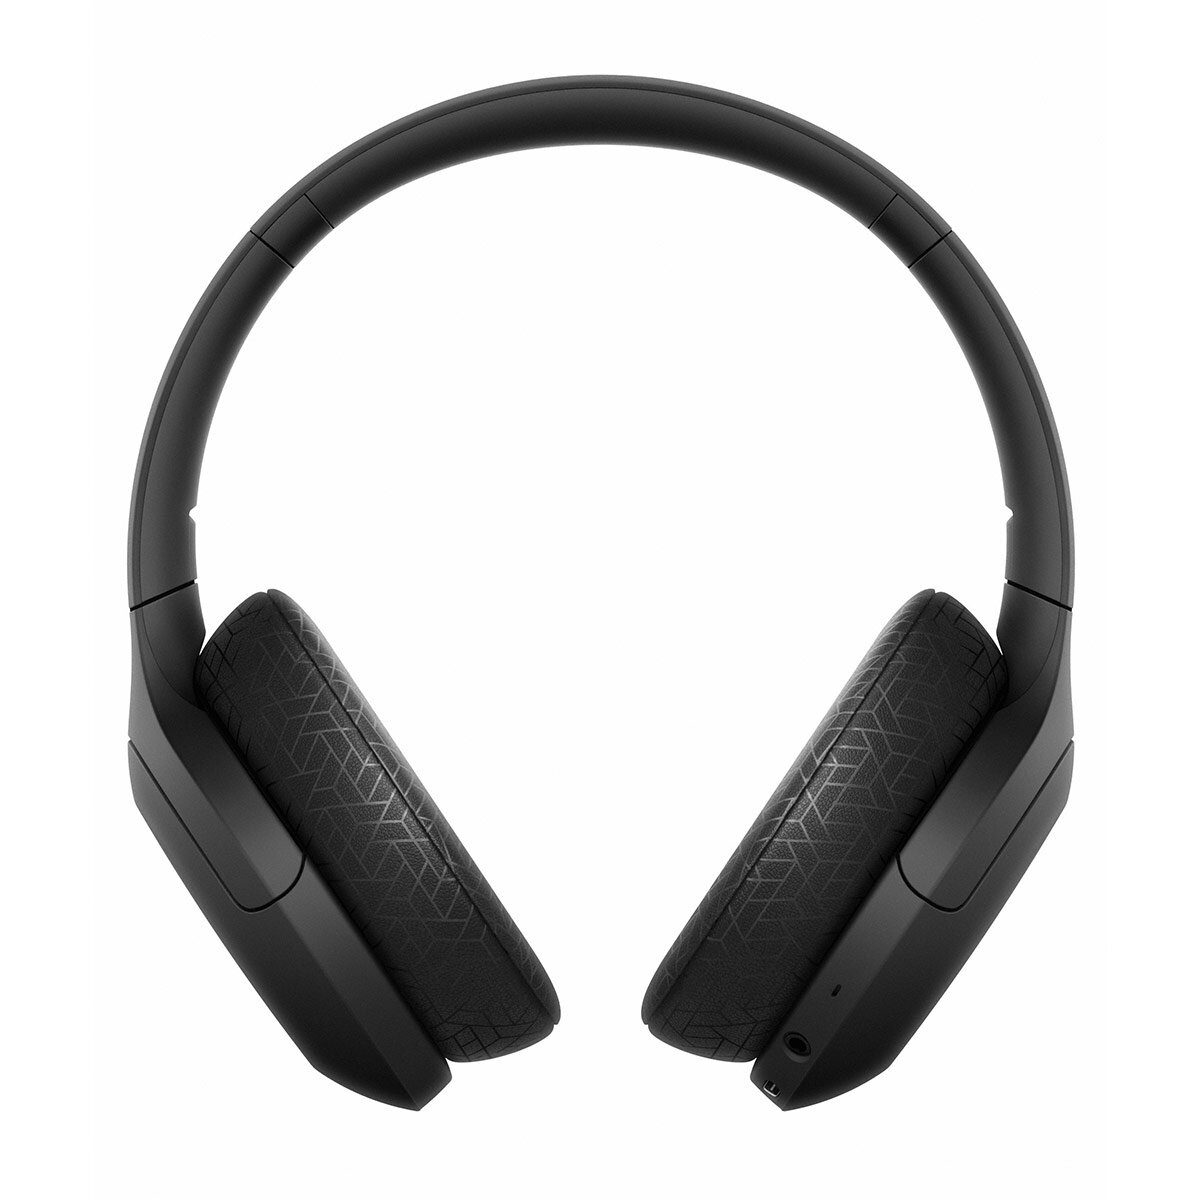 Buy Sony WHH910NB Noise Cancelling Wireless Headphones in Black at Costco.co.uk